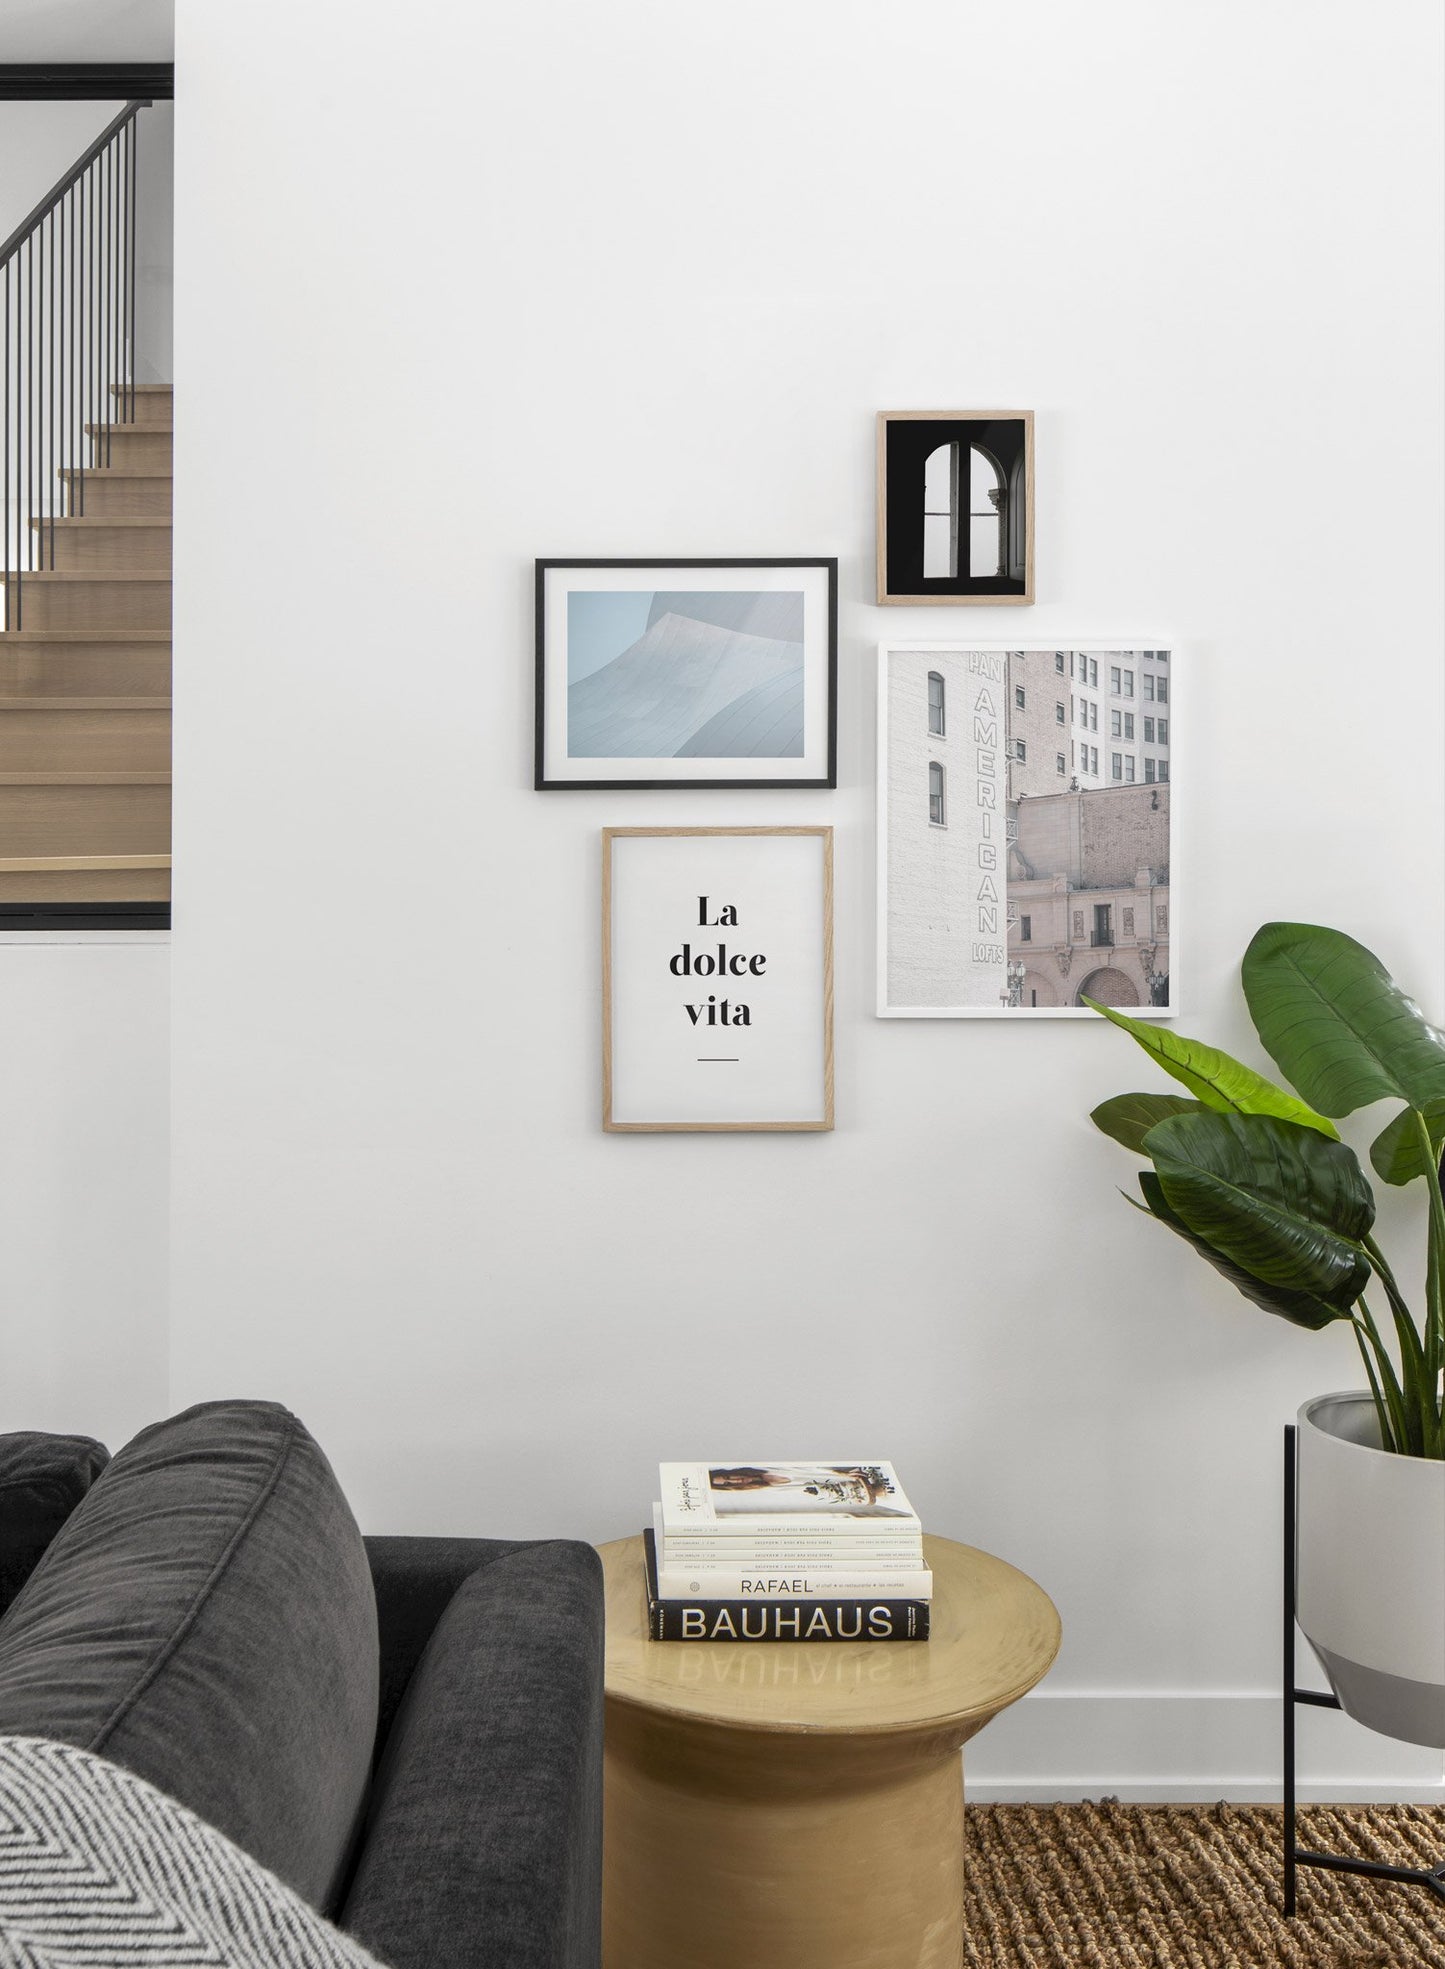 American Lofts modern minimalist photography poster by Opposite Wall - Living room